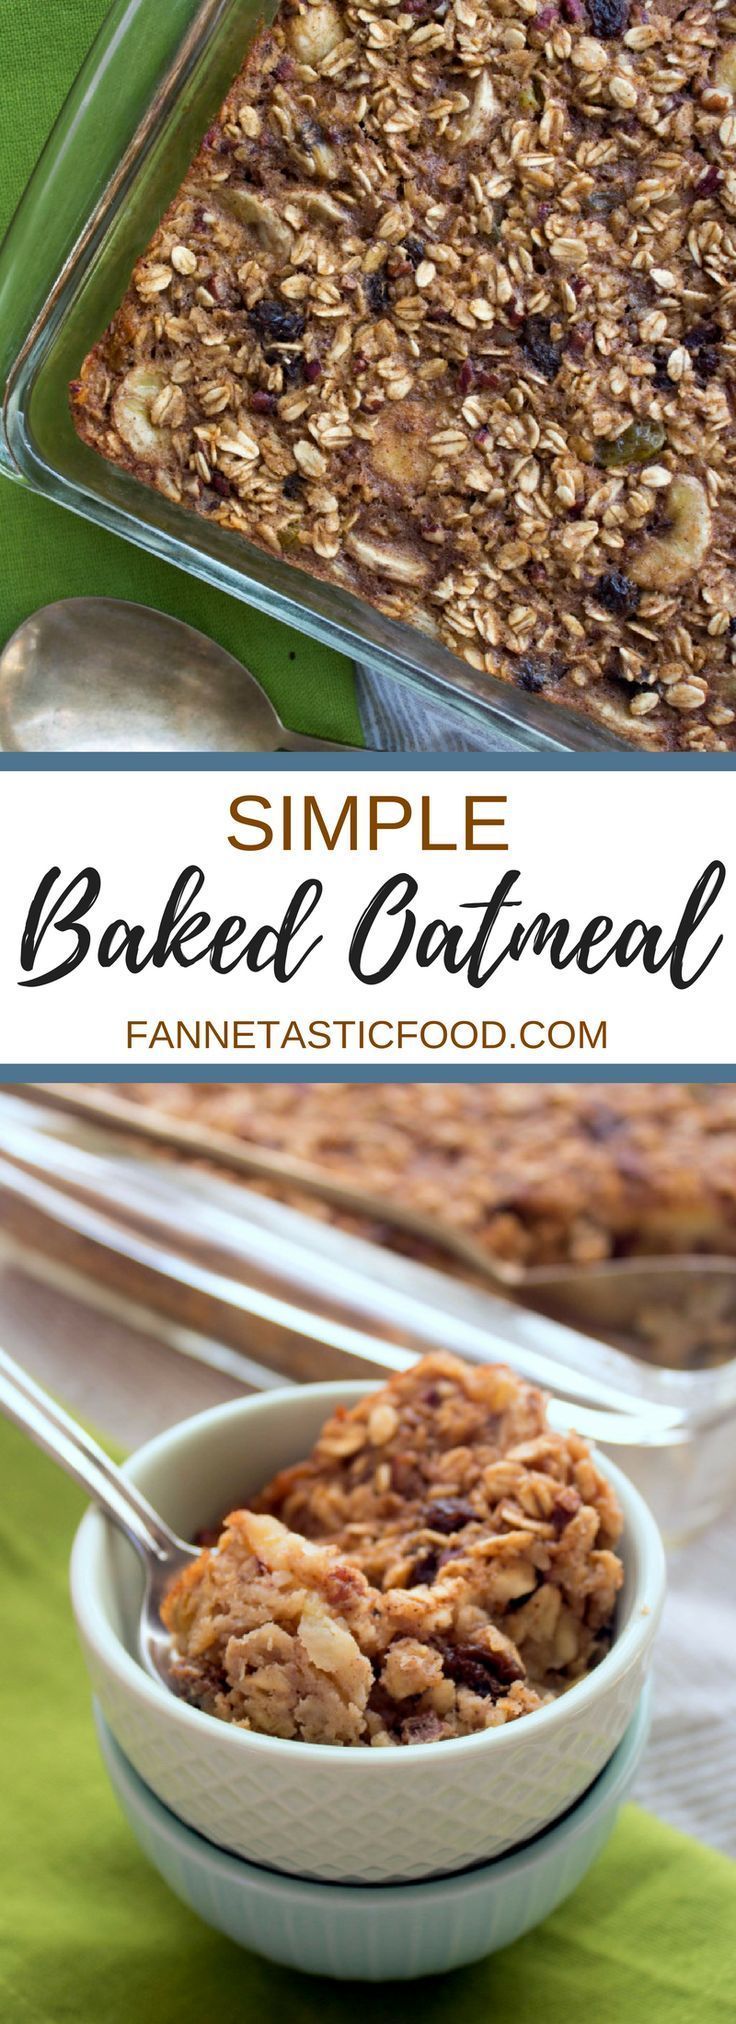 Simple Baked Oatmeal Recipe | Easy and Healthy -   18 healthy recipes Simple brunch food ideas